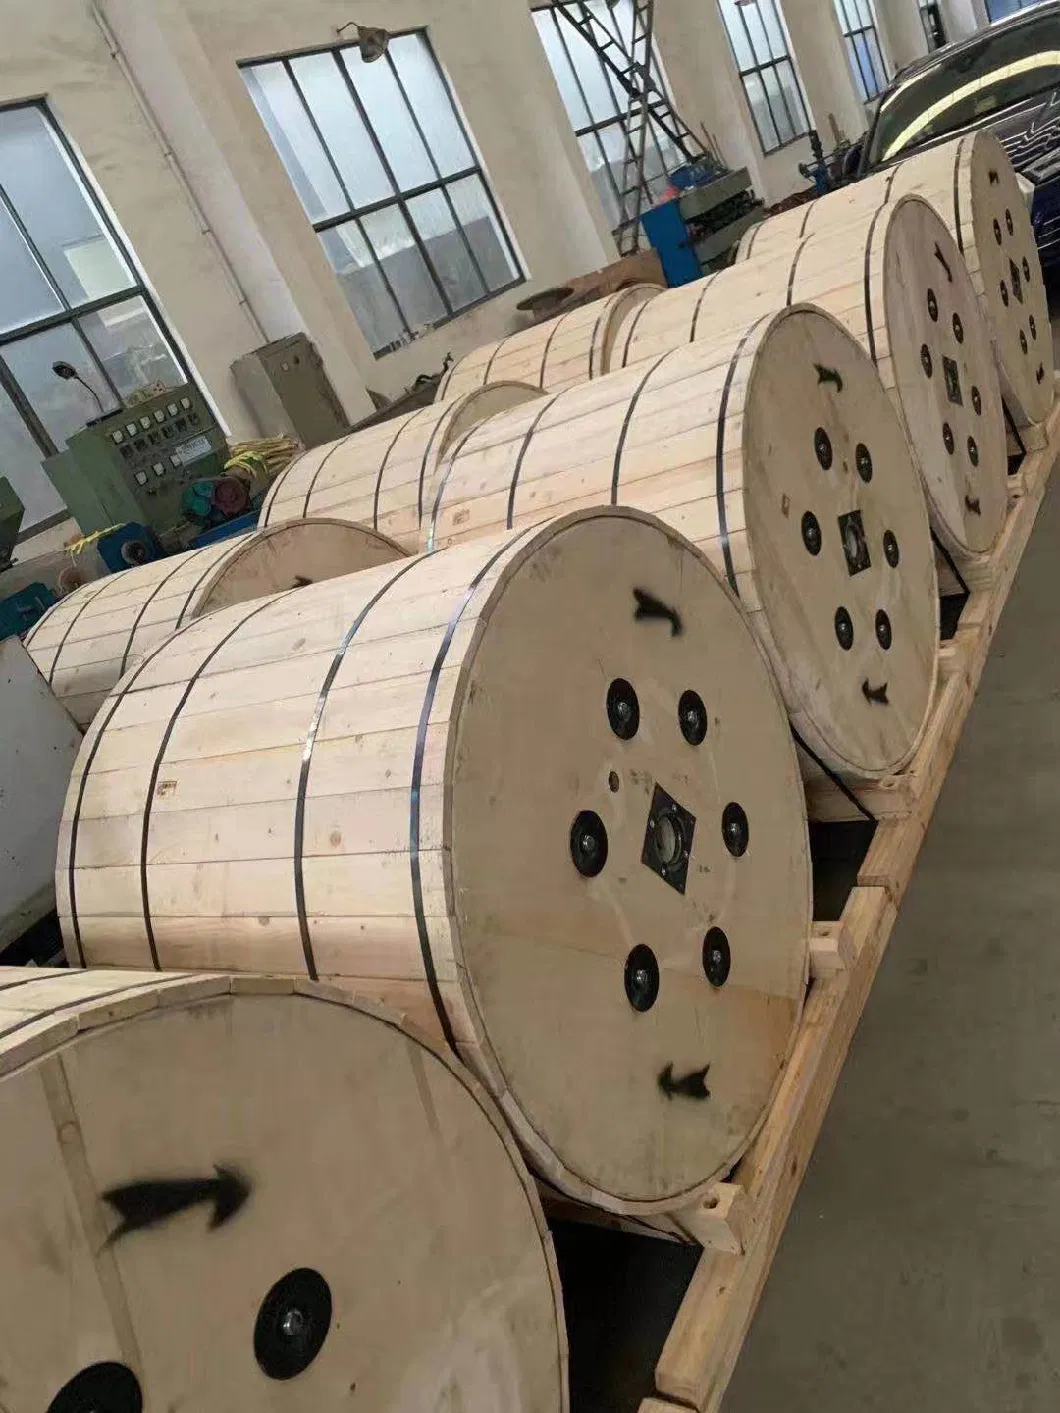 CCS Copper Wire Bunched Twisted Stranded Wire for Grounding Copper-Clad Steel Conductor Wire